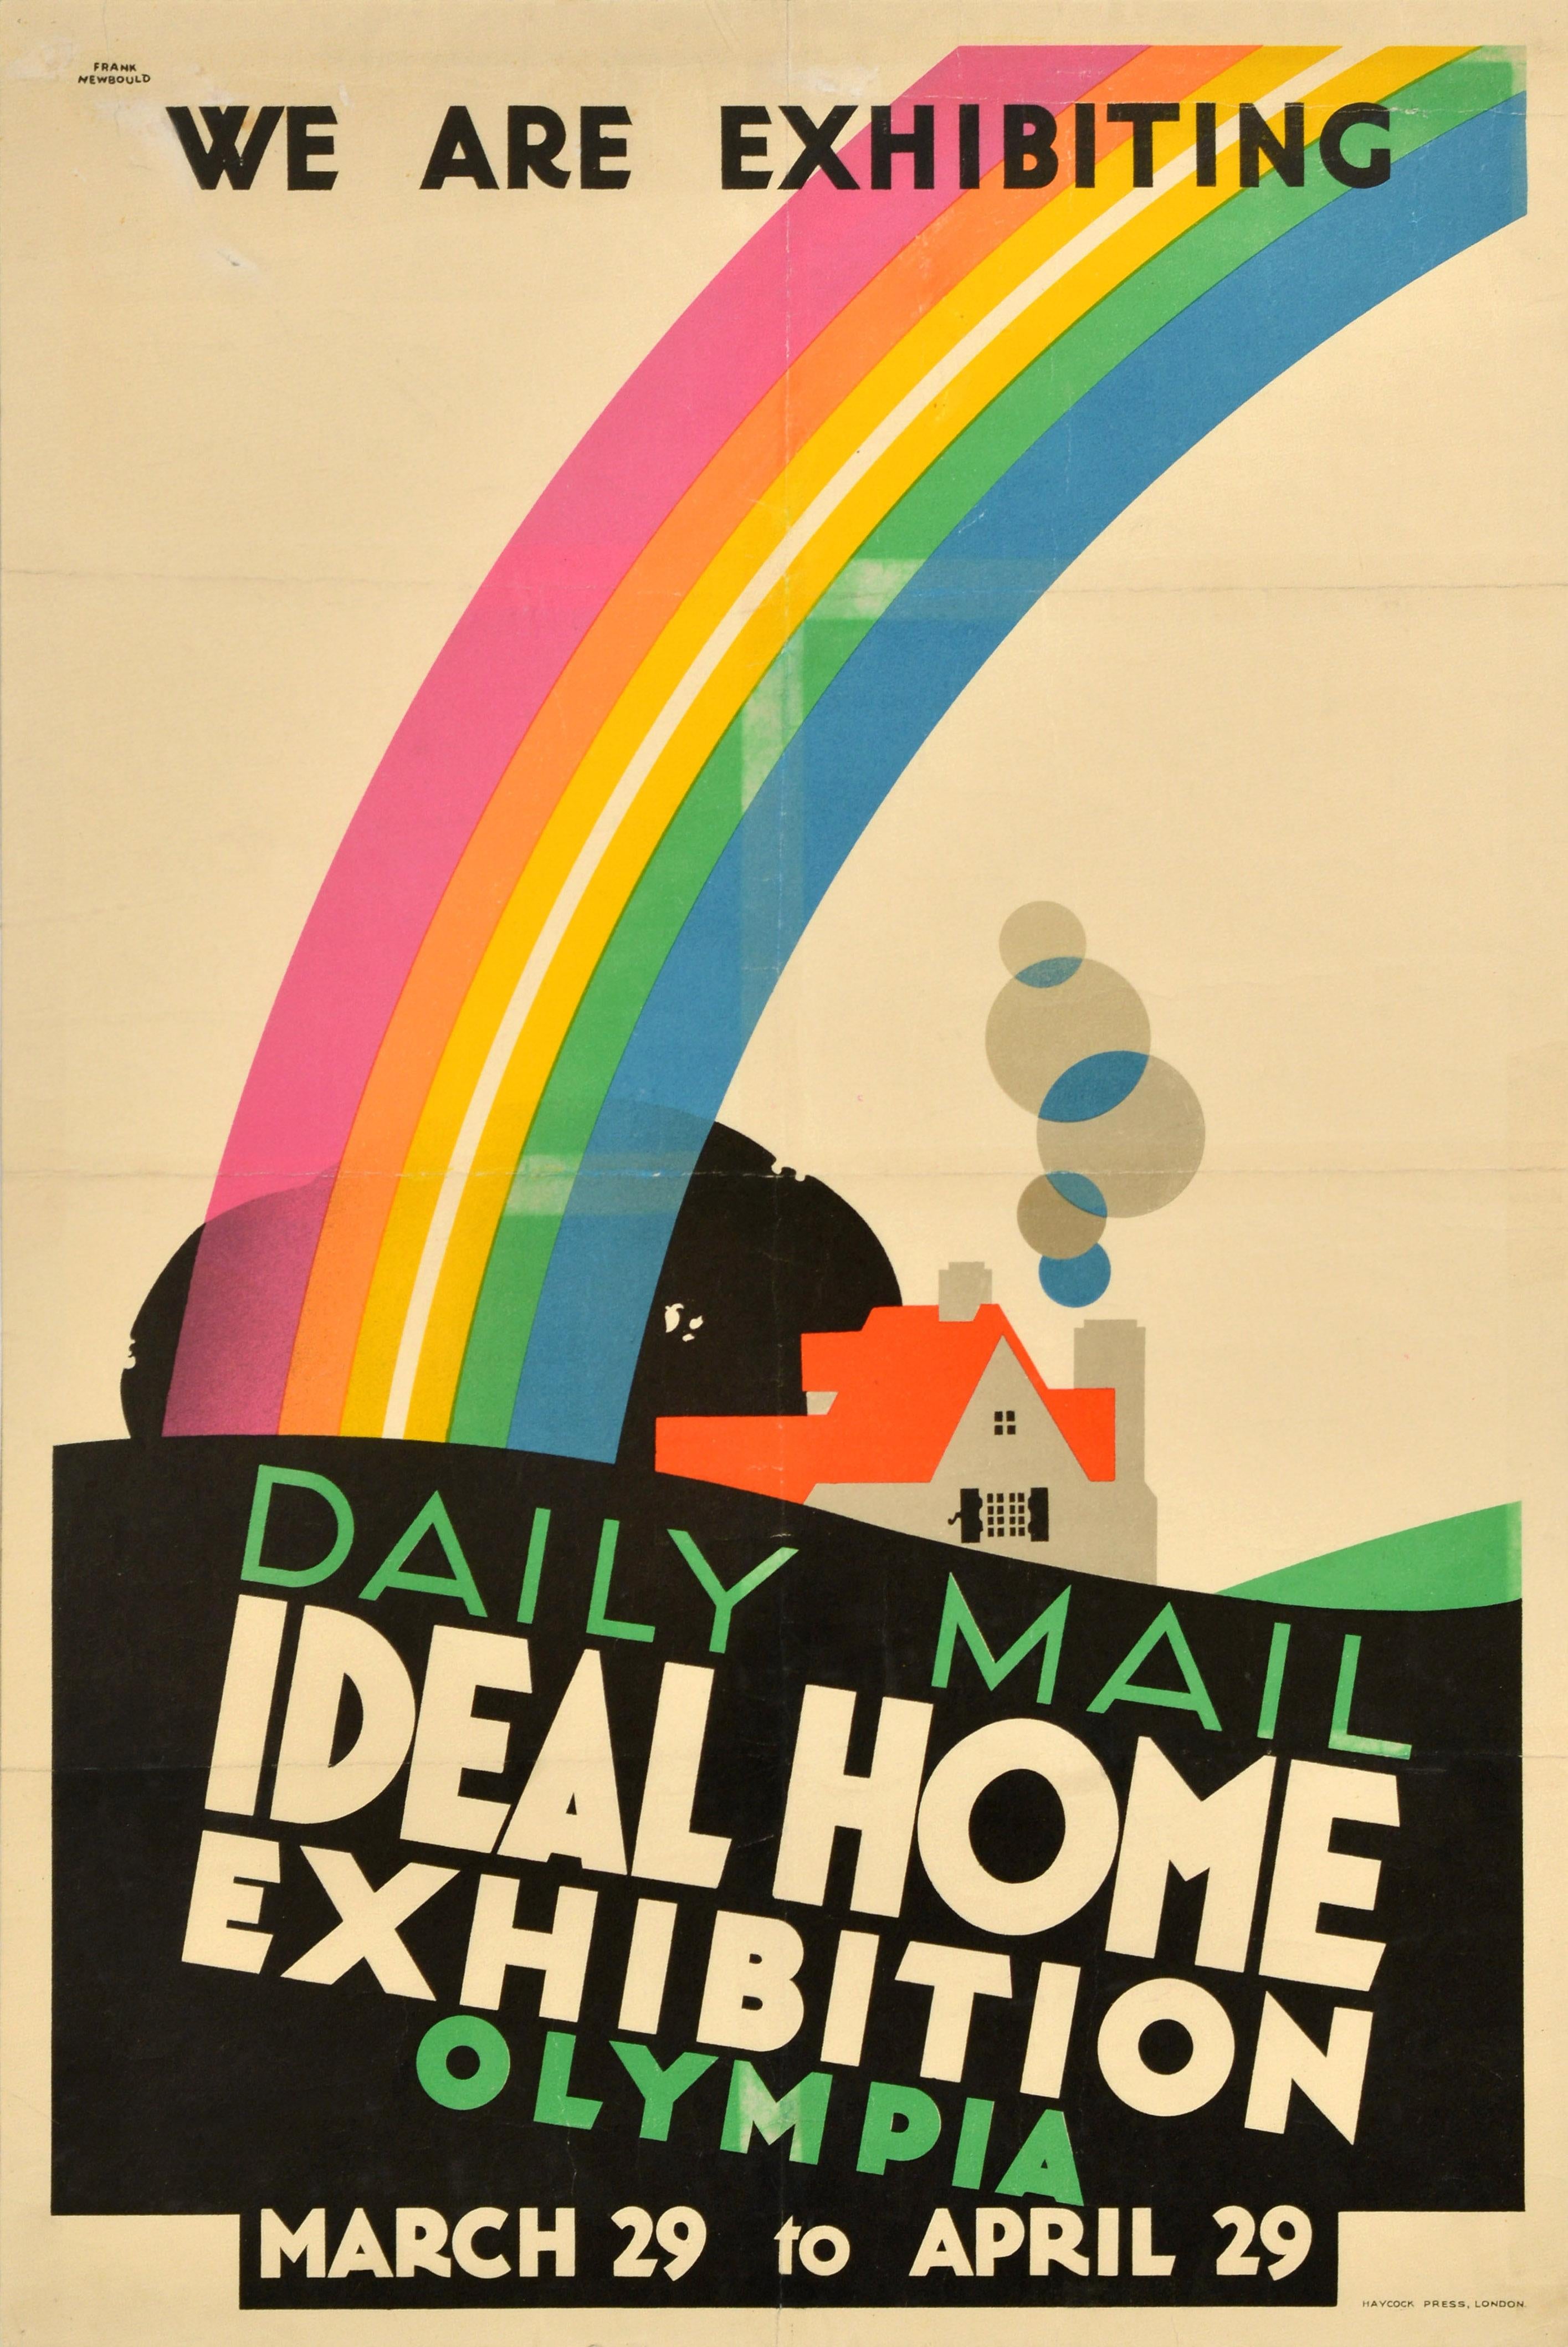 Frank Newbould Print - Original Vintage Advertising Poster Ideal Home Exhibition Daily Mail Olympia